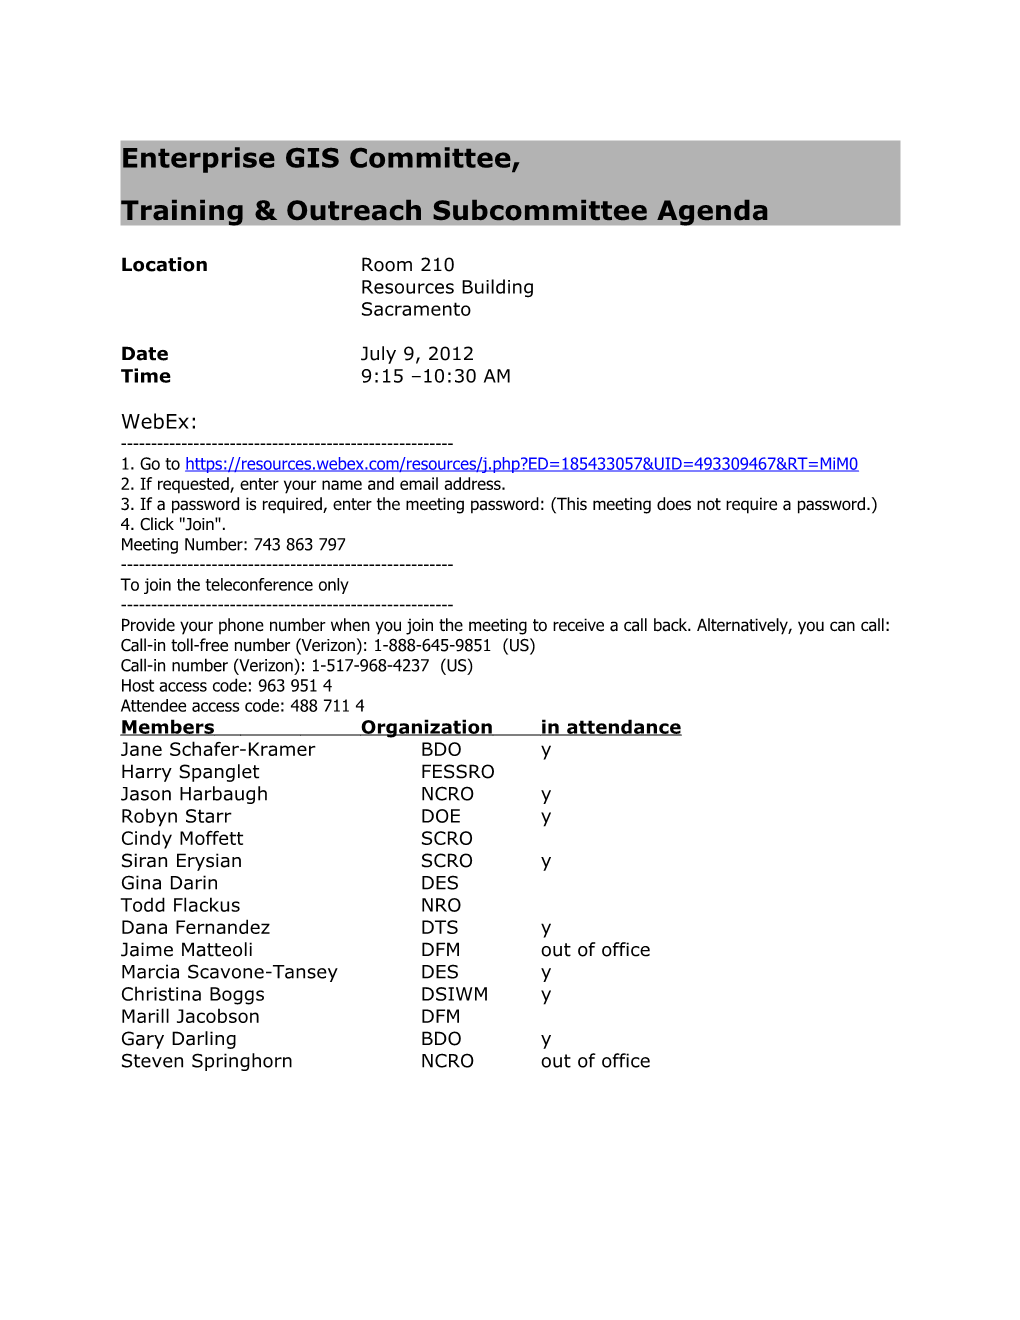 Training & Outreach Subcommittee Agenda